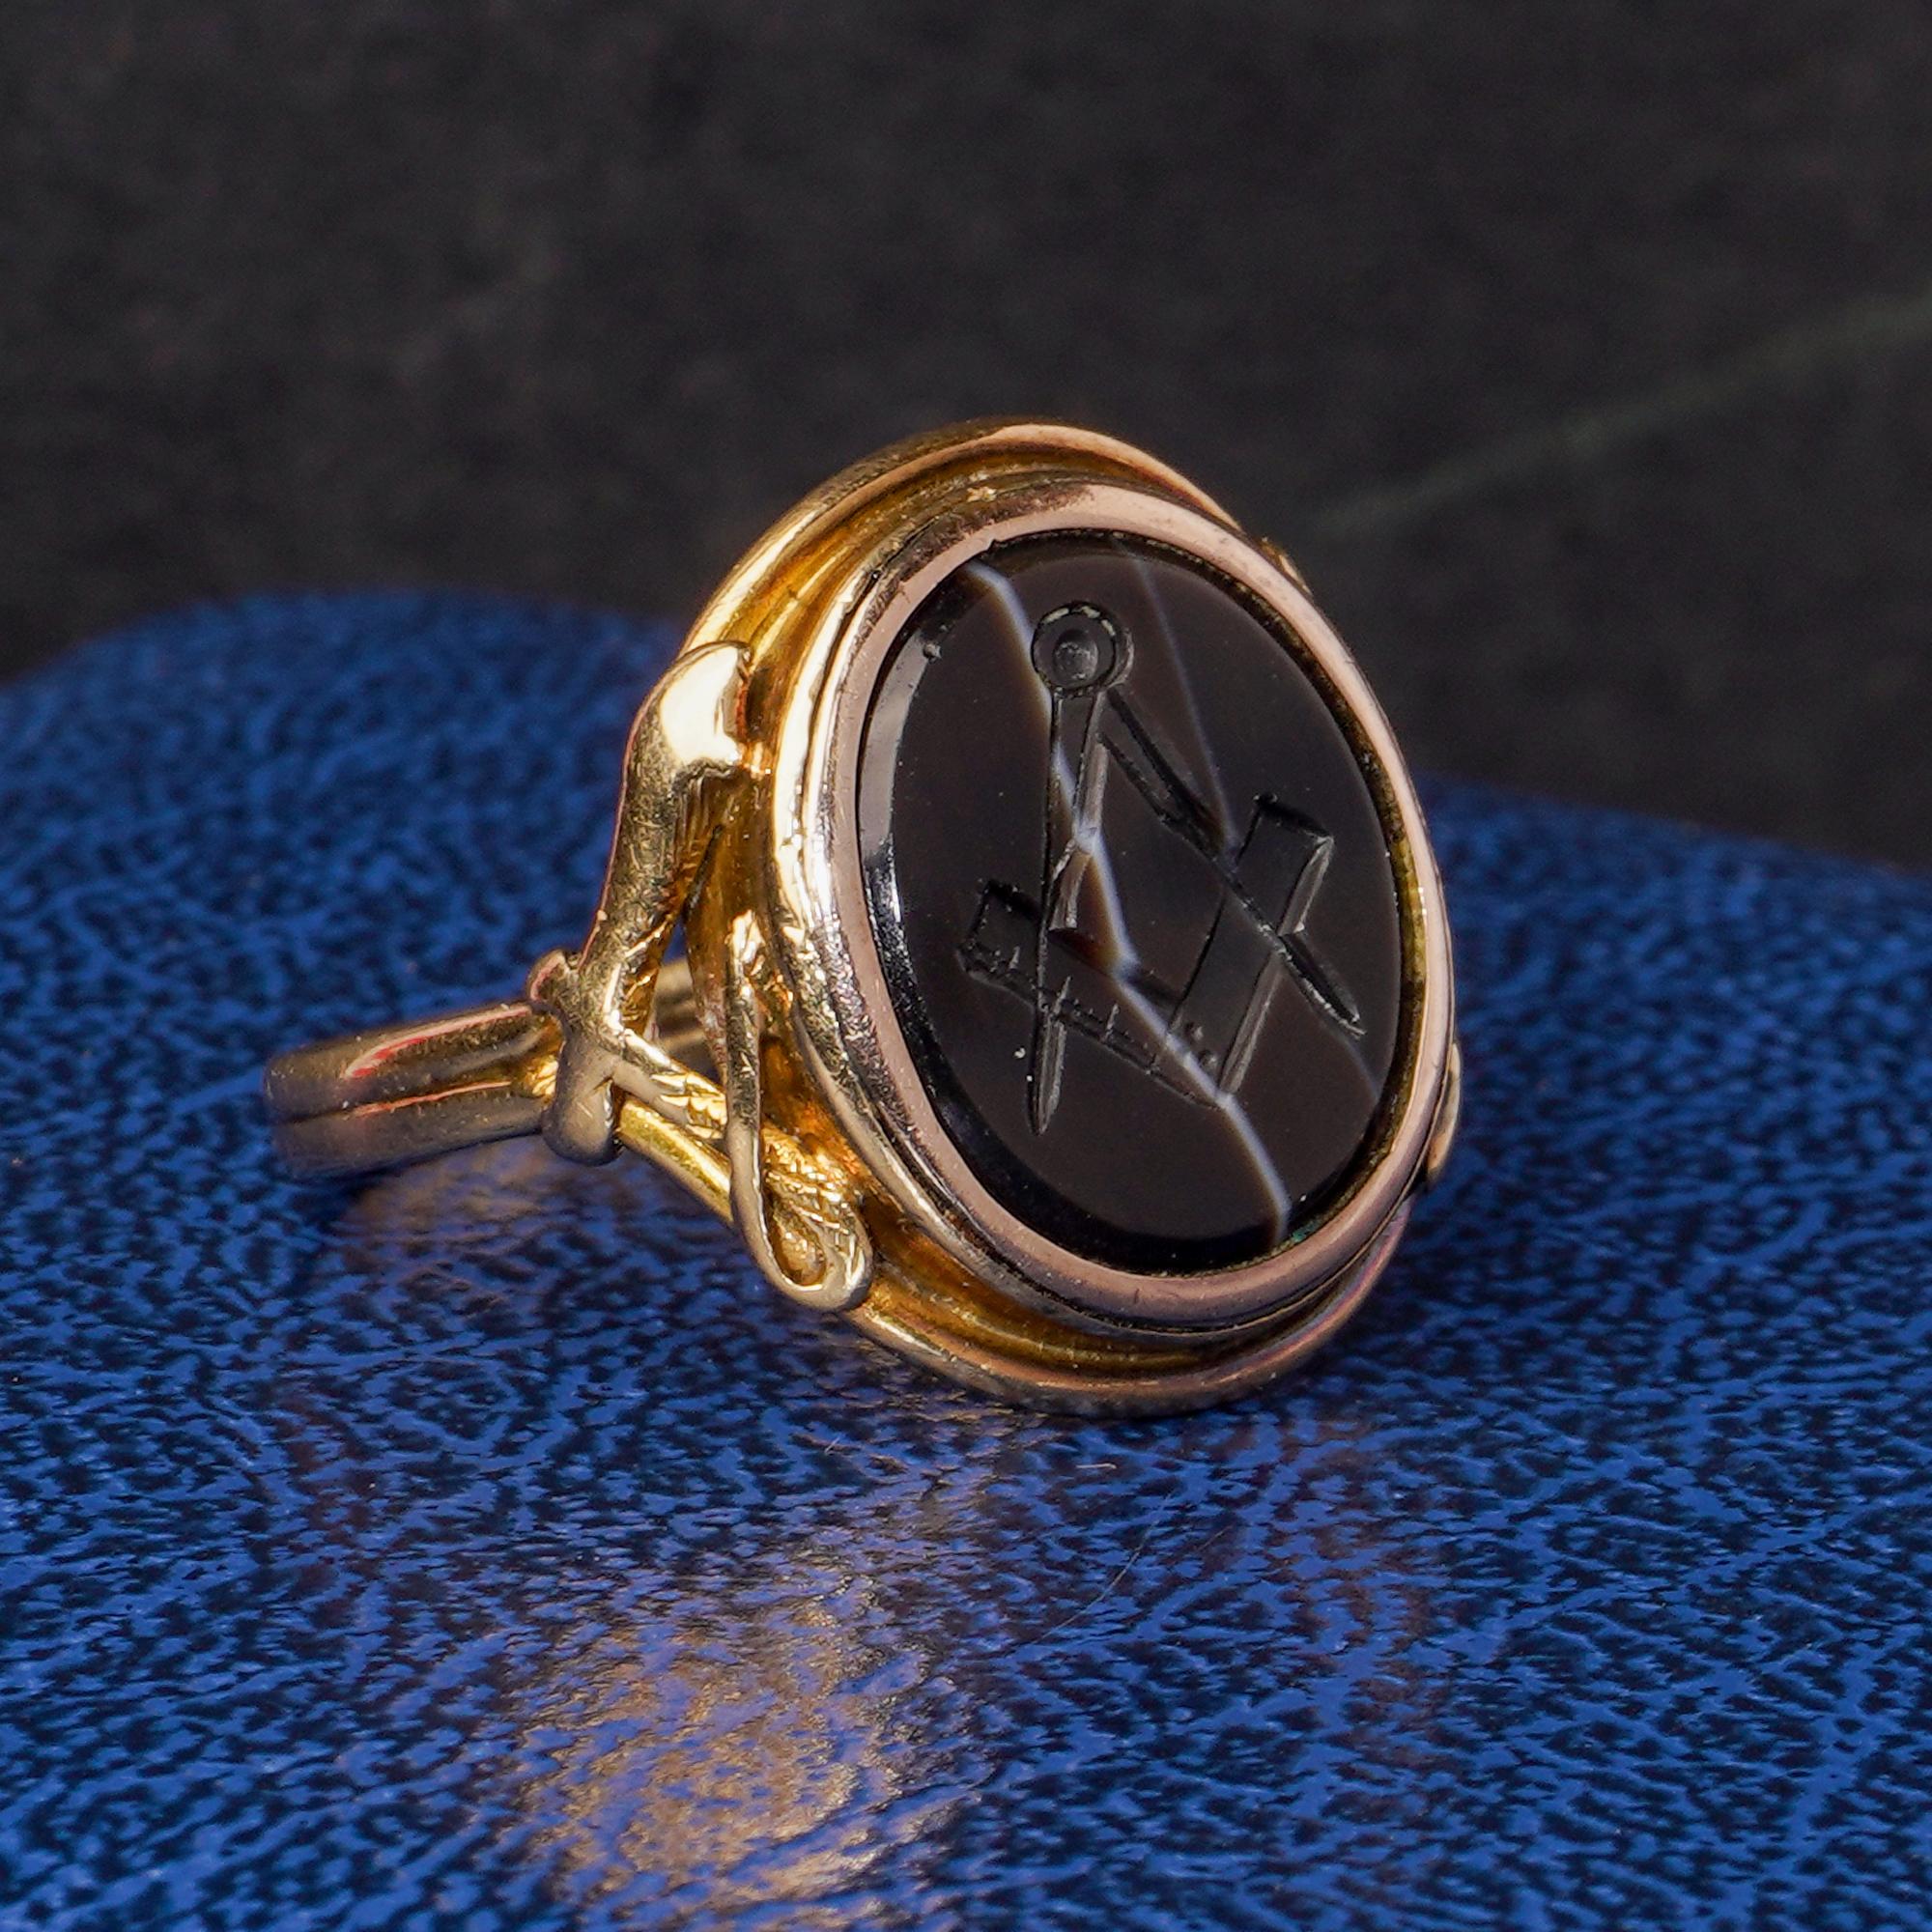 Antique Victorian 18kt. yellow gold Banded agate masonic signet ring, depicting a Square and Compass.
Made in England, Circa 1870's
X - Ray tested positive for 18kt. gold.

While there are many symbols associated with Freemasonry, none are more